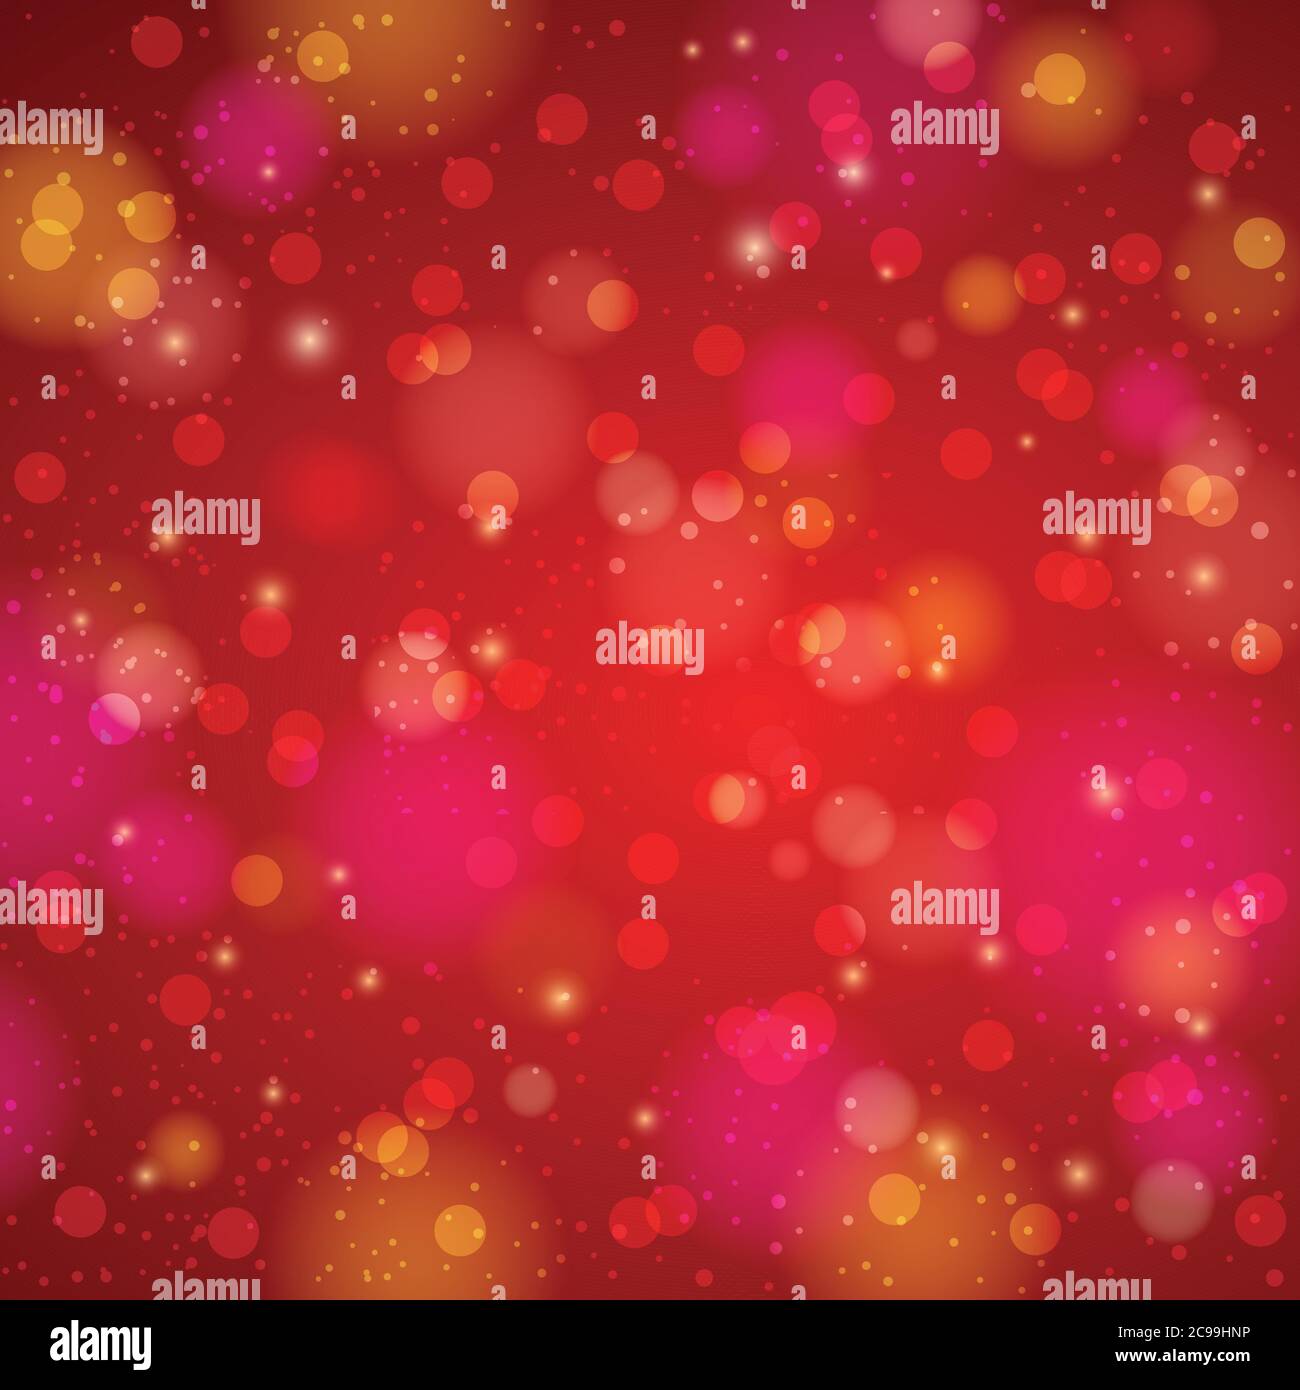 Red shine background with bokeh, vector illustration Stock Vector